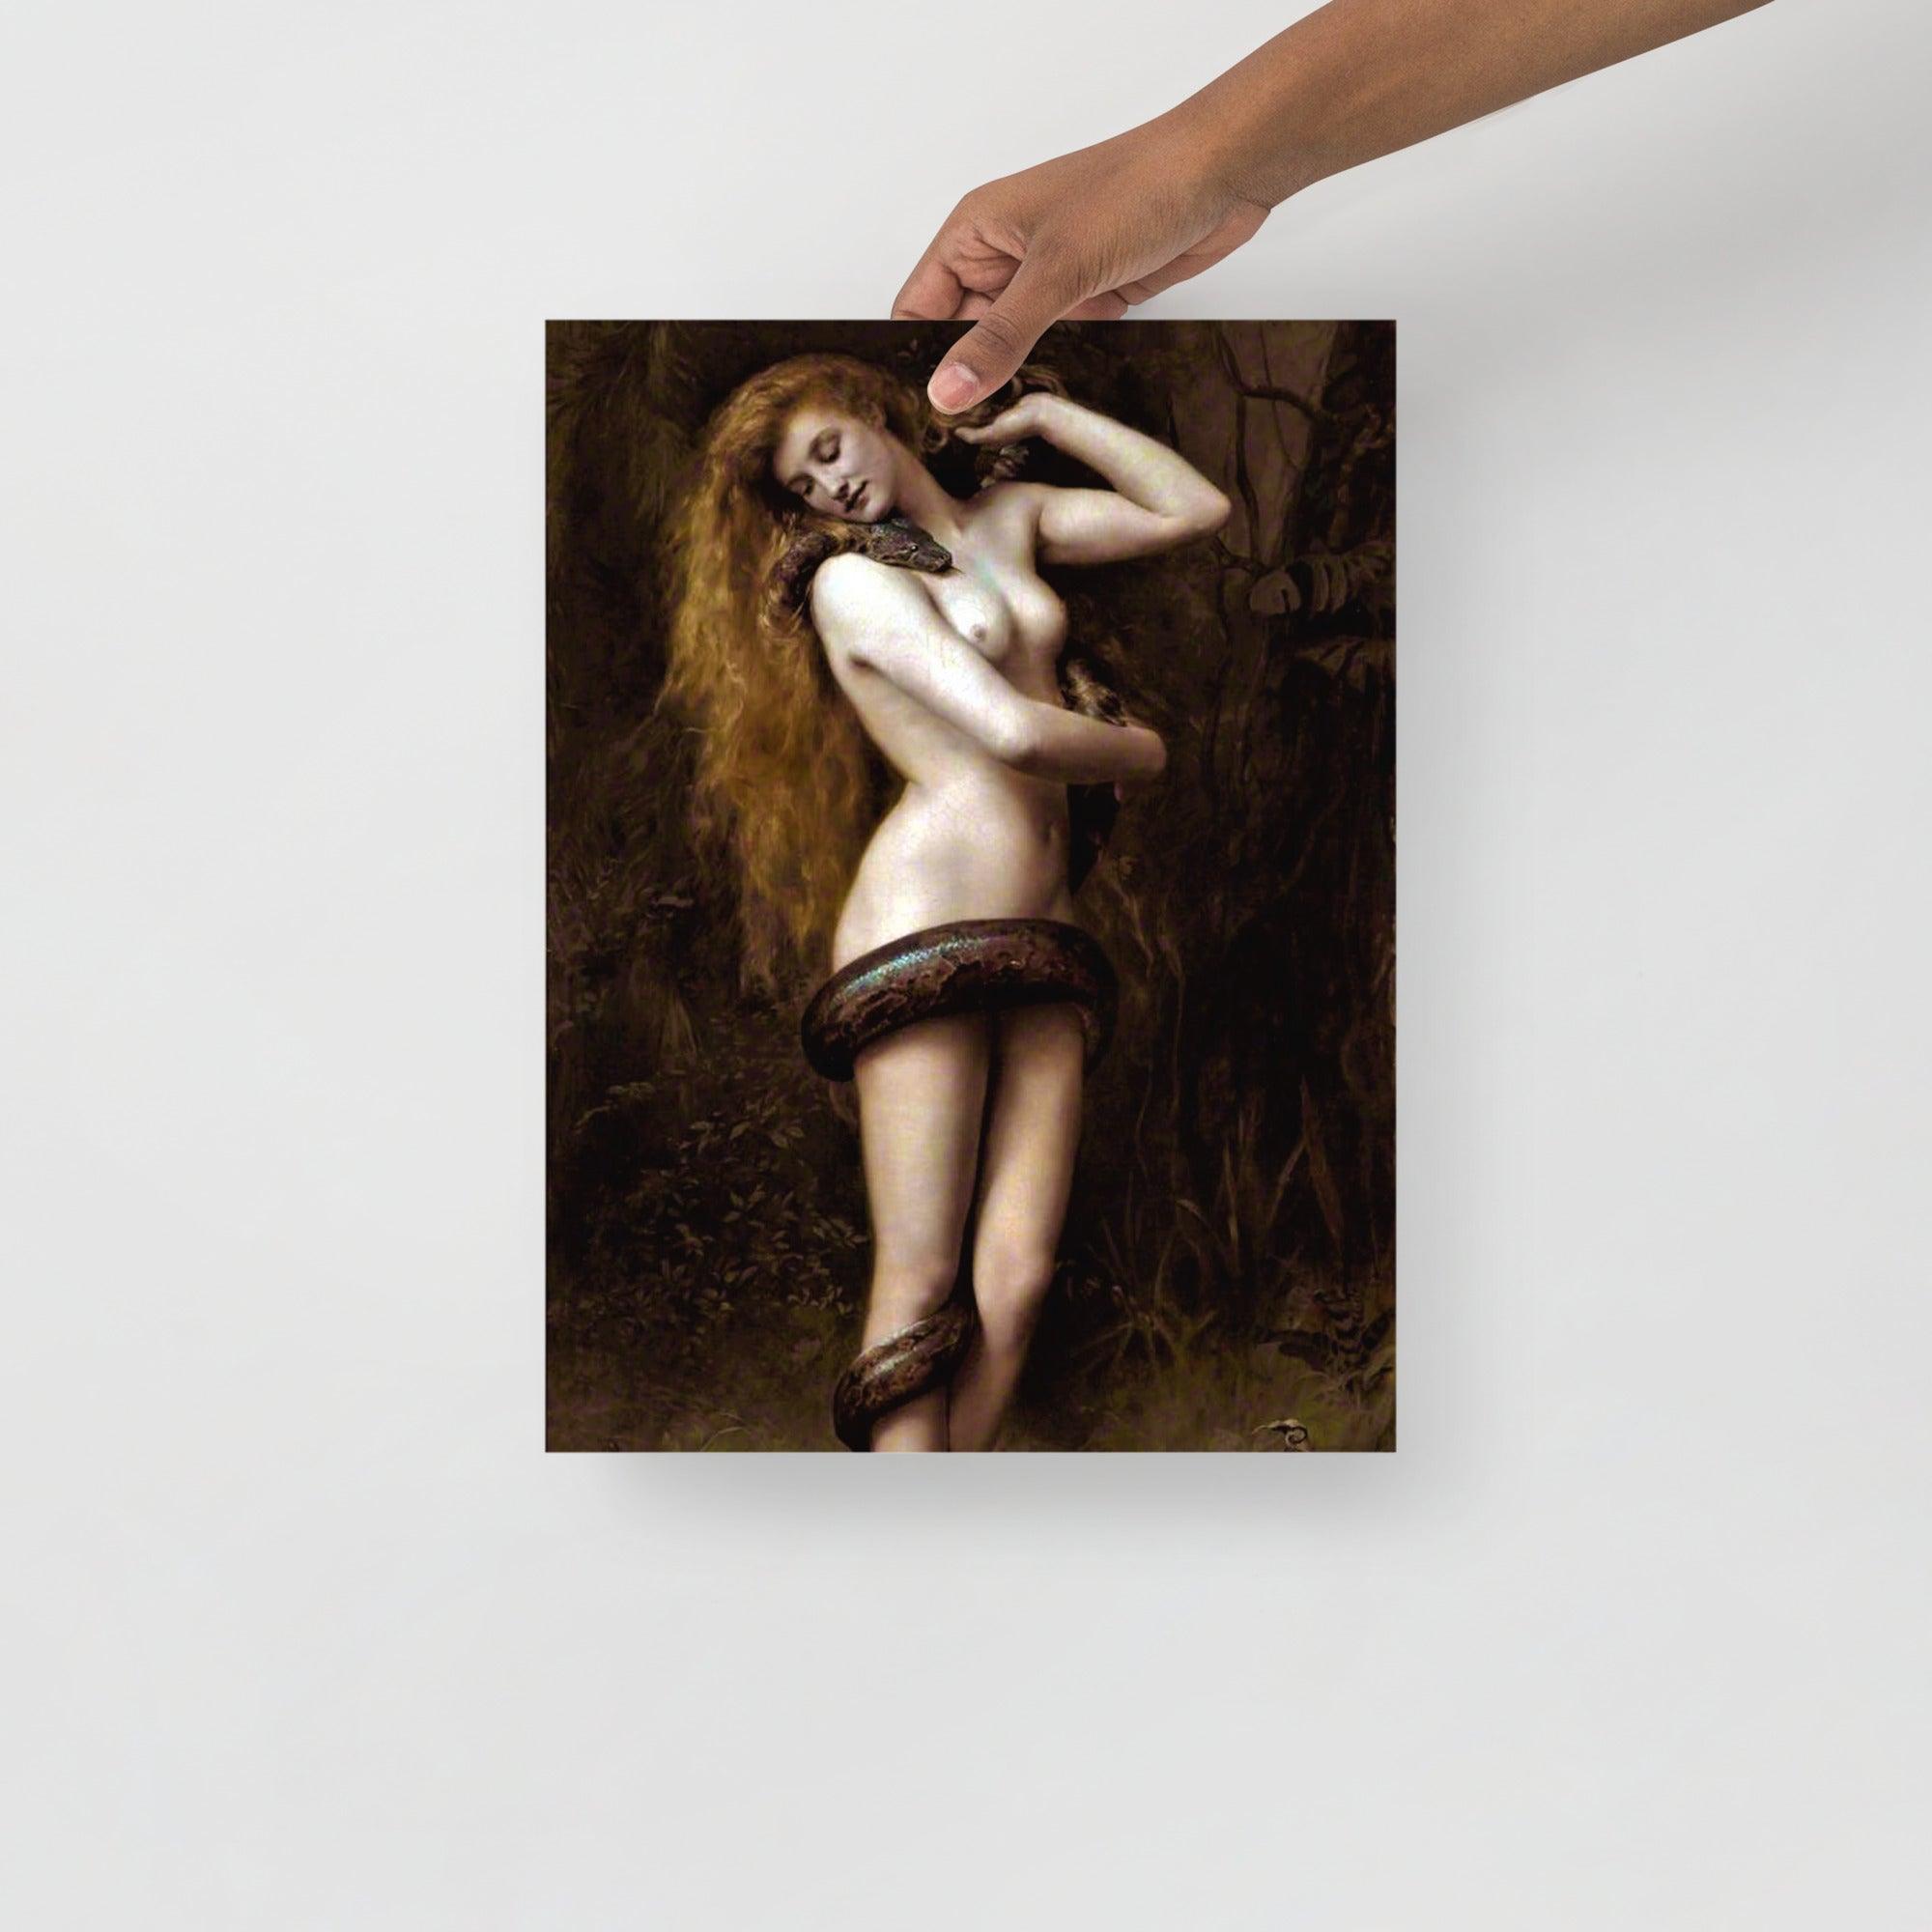 A Lilith by John Collier poster on a plain backdrop in size 12x16”.